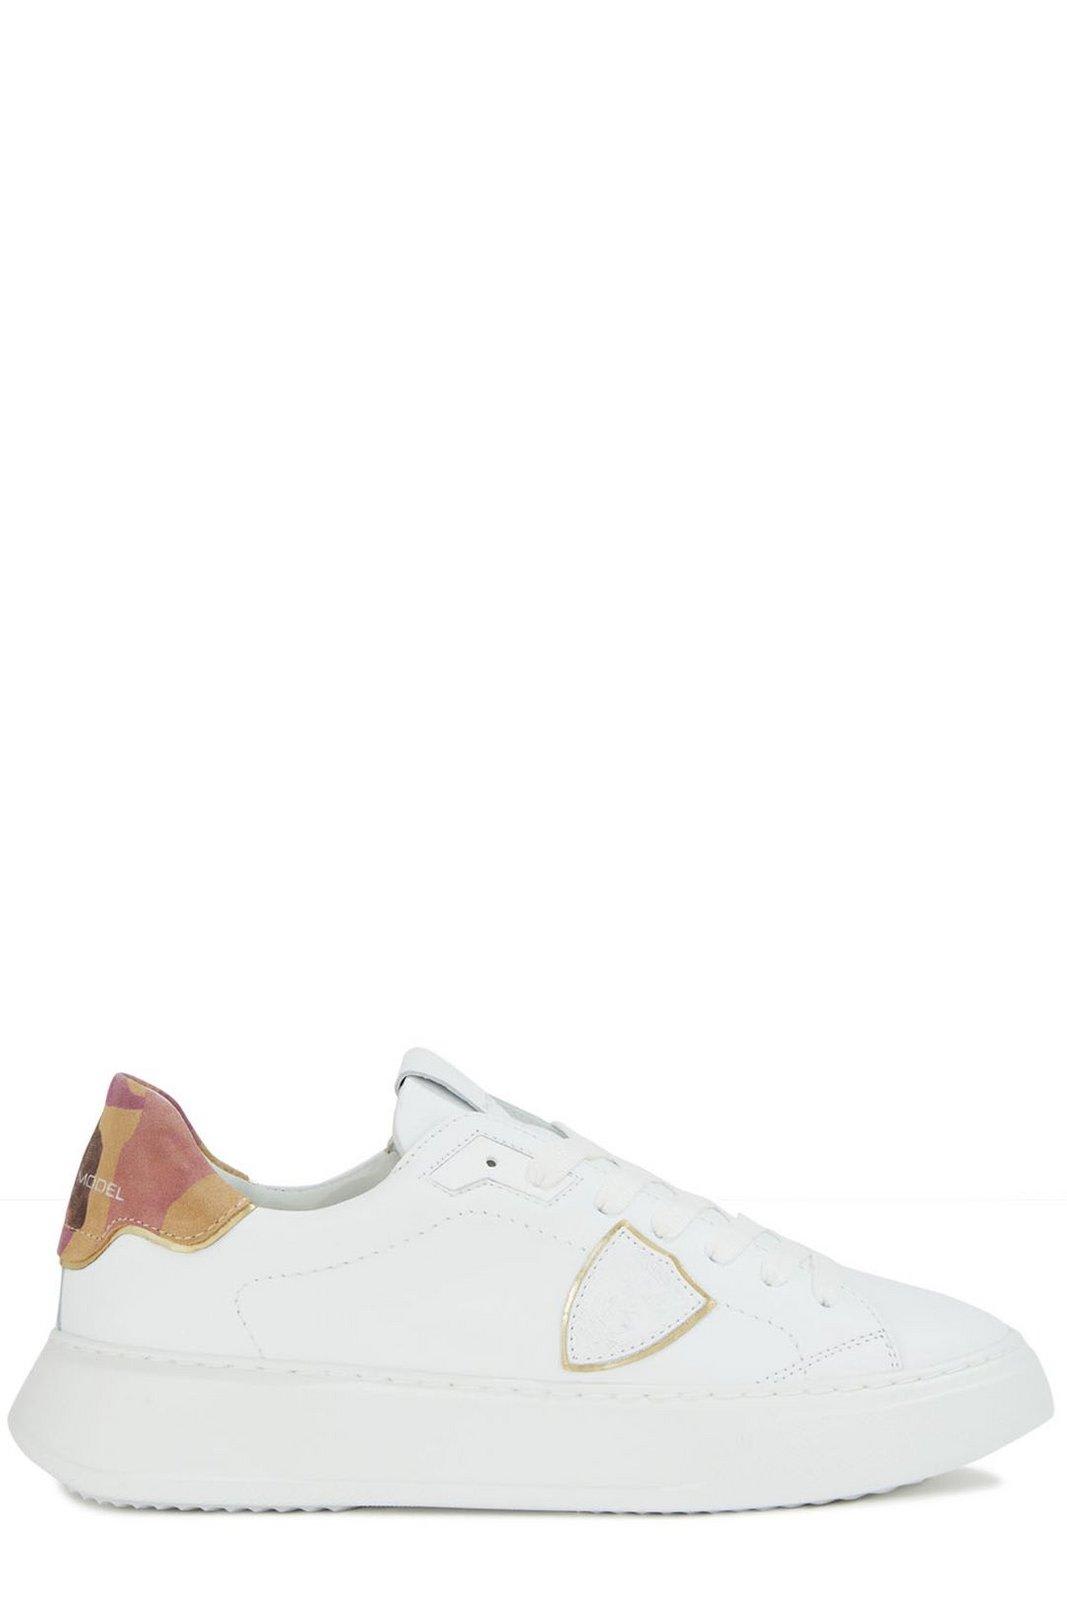 Philippe Model Temple Veau Lace-up Sneakers